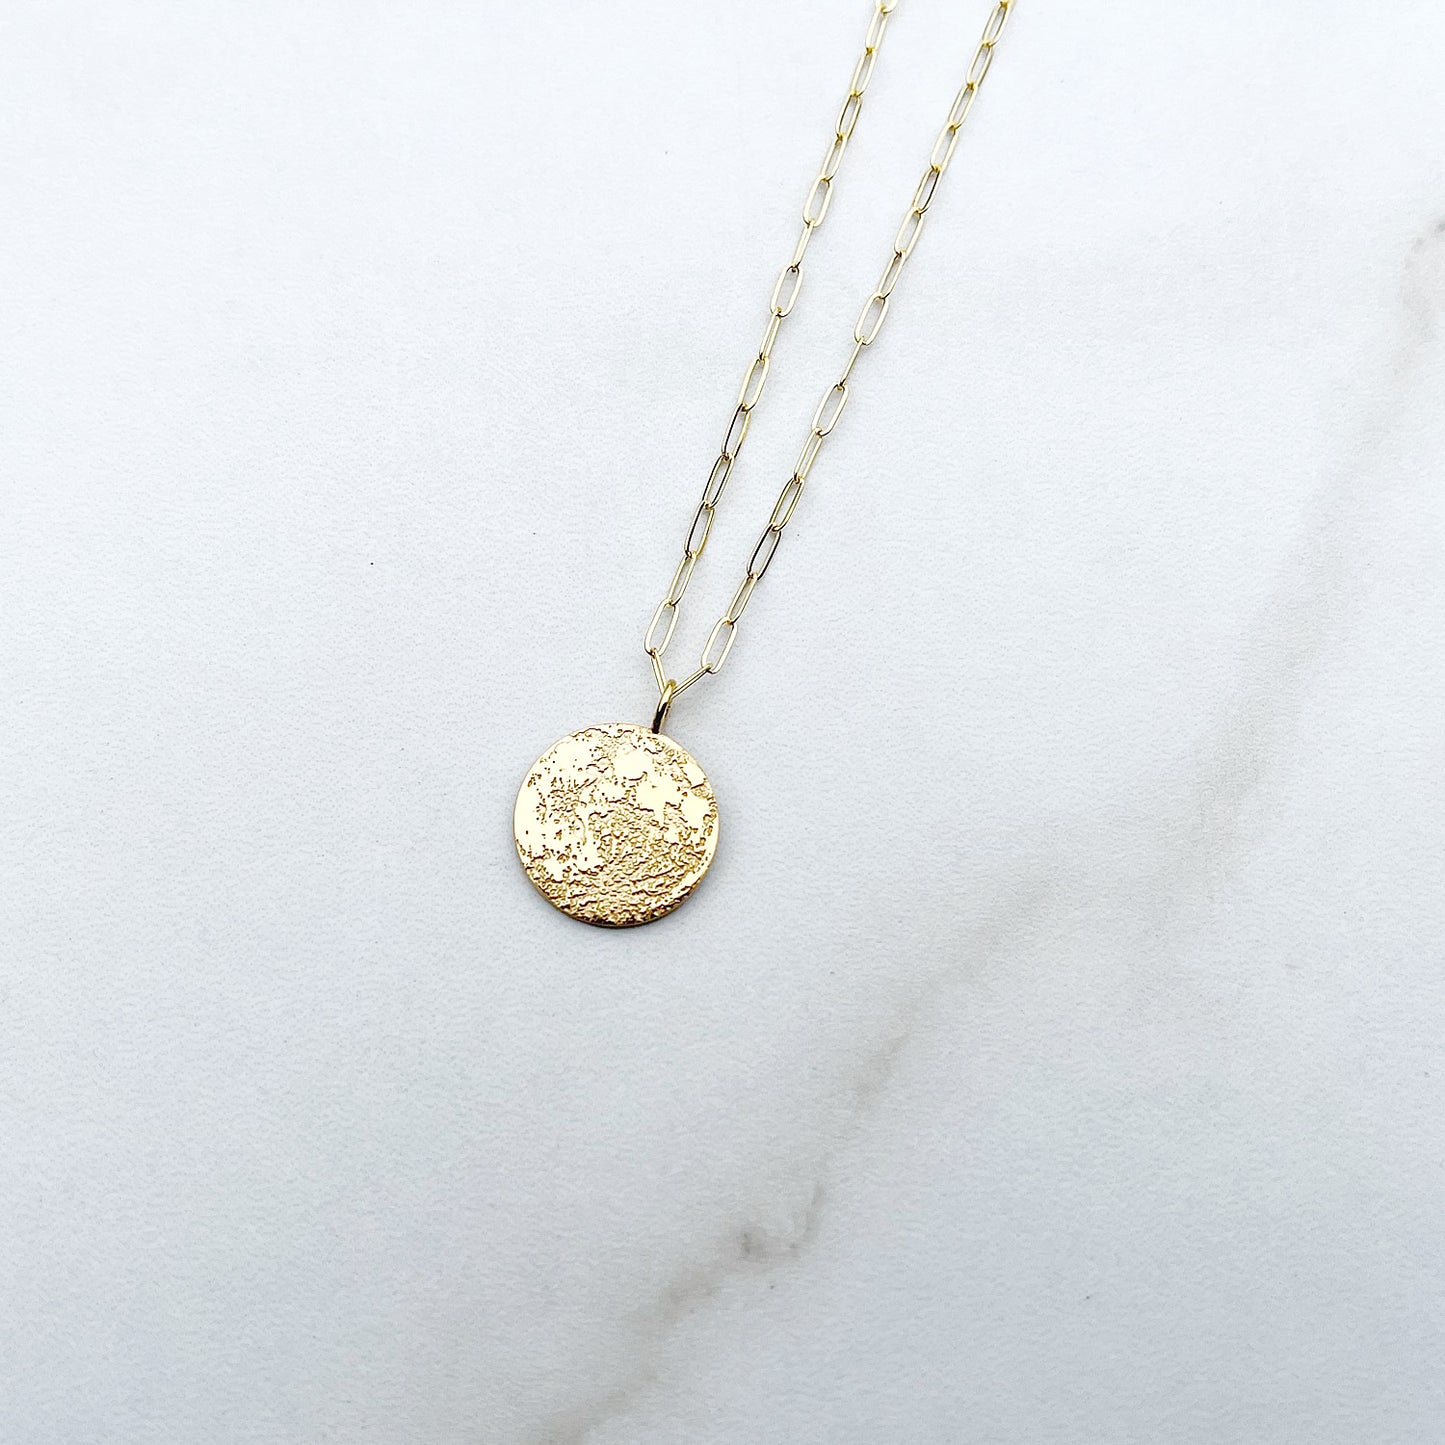 Full Moon Necklace in Sterling Silver or Gold Vermeil, Gift for Her